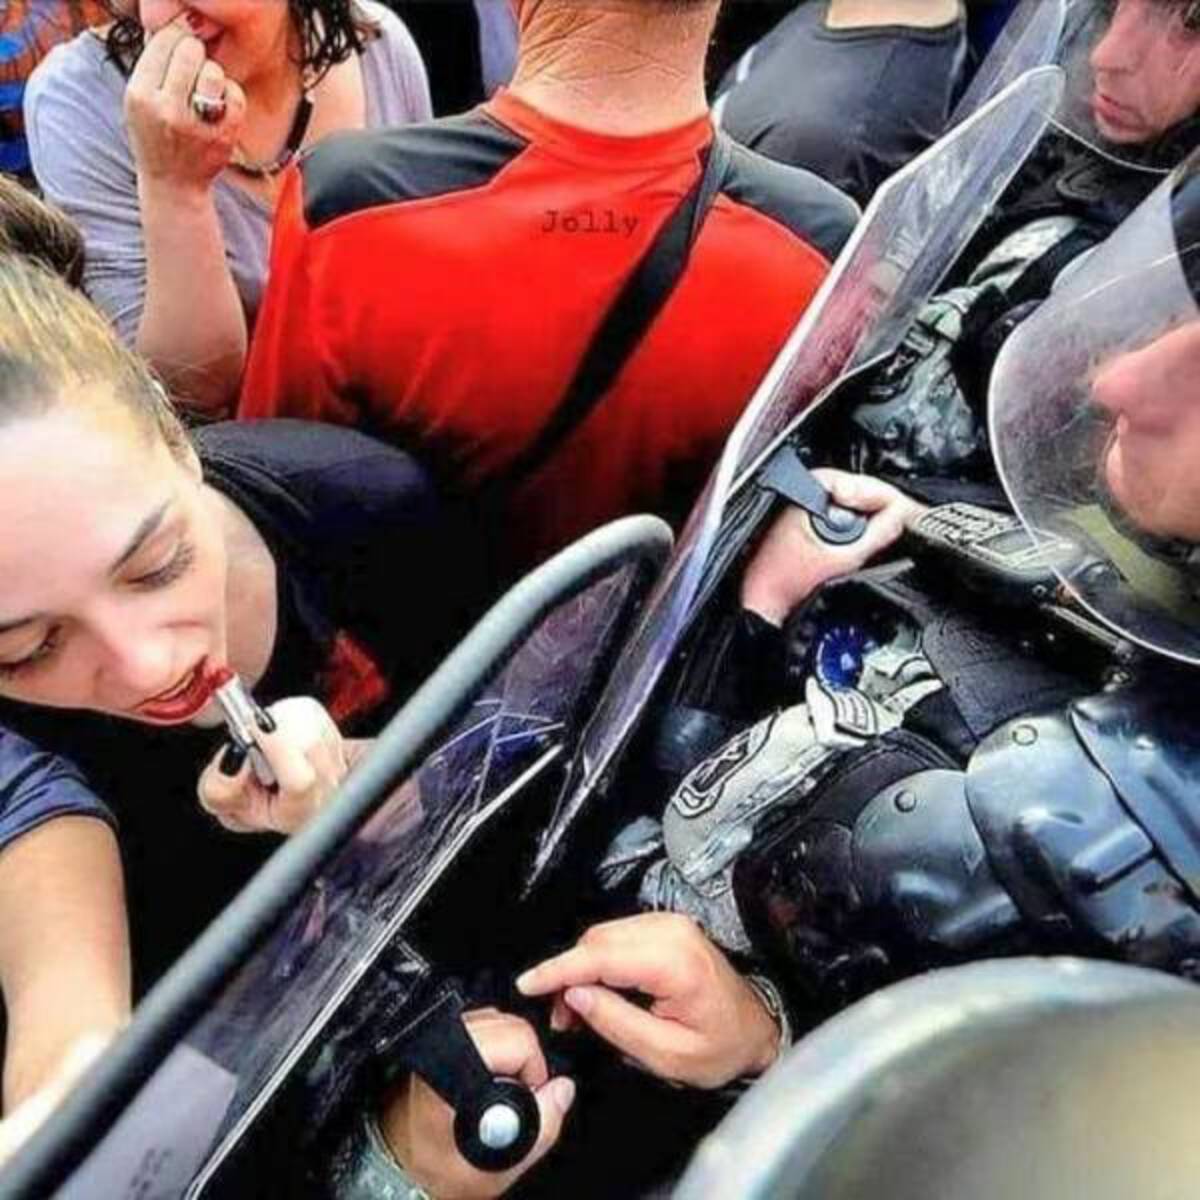 woman fixing lipstick in riot shield - Jolly